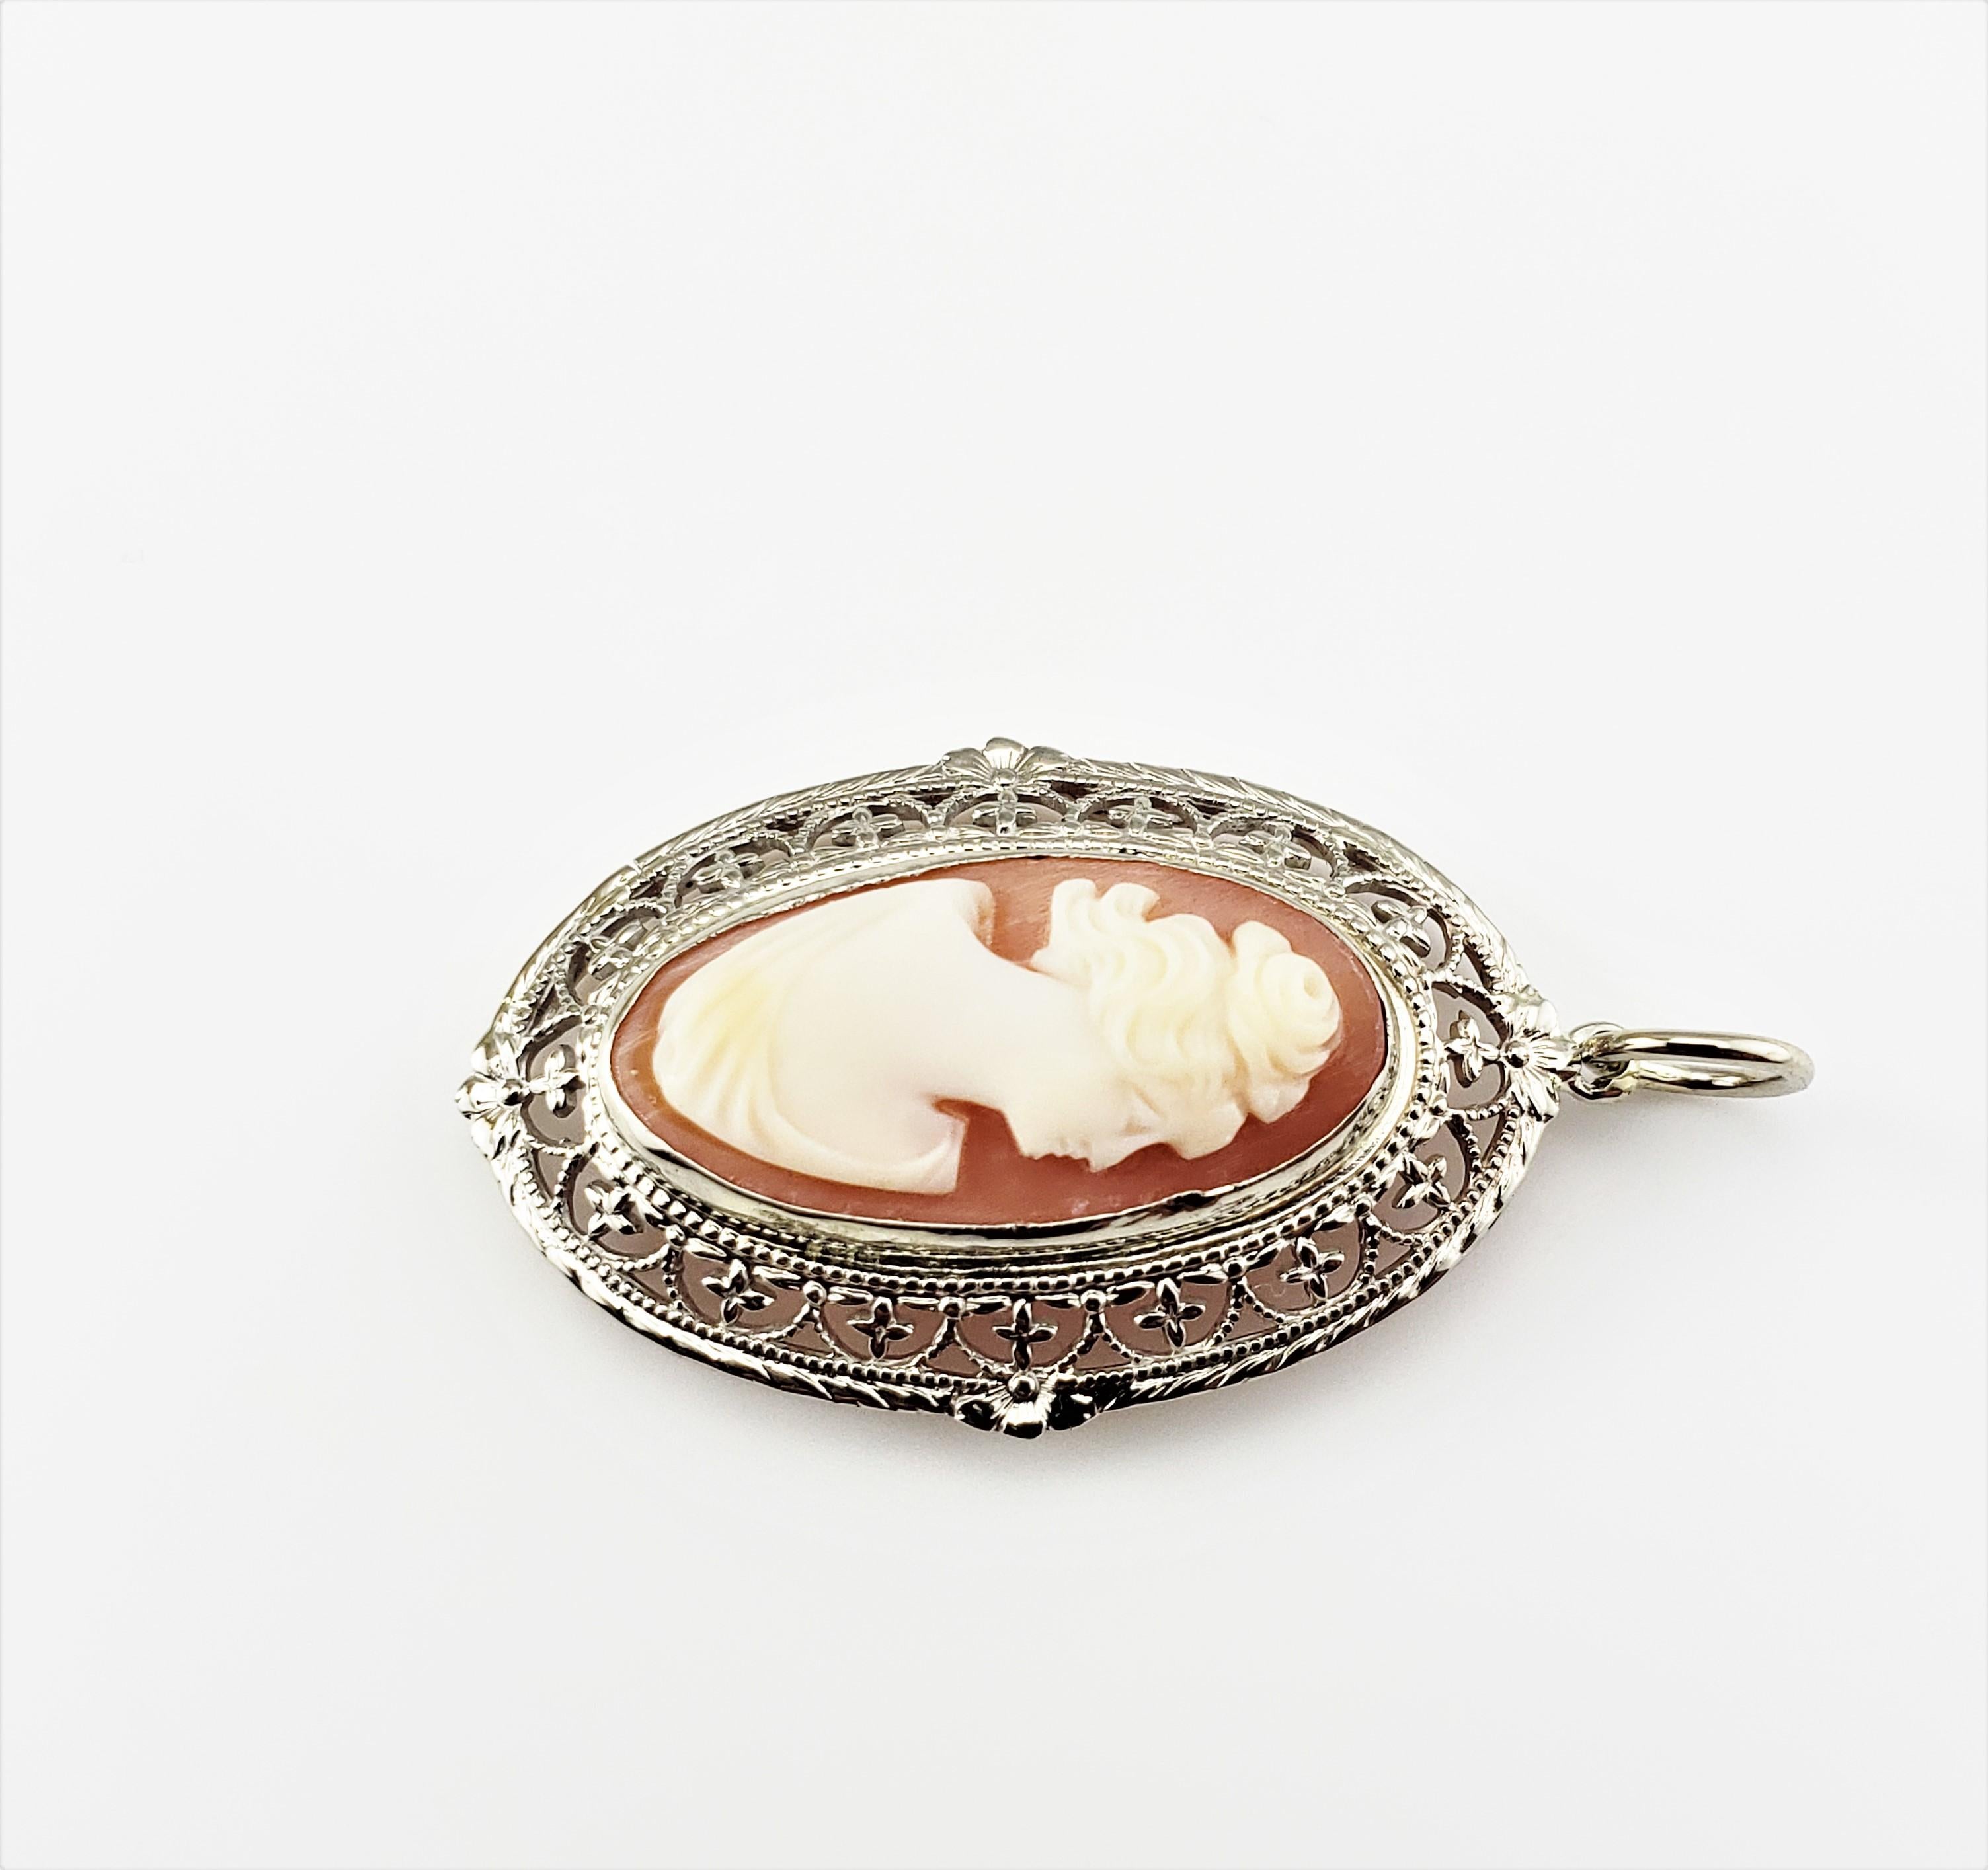 14 Karat White Gold Cameo Pendant In Good Condition For Sale In Washington Depot, CT